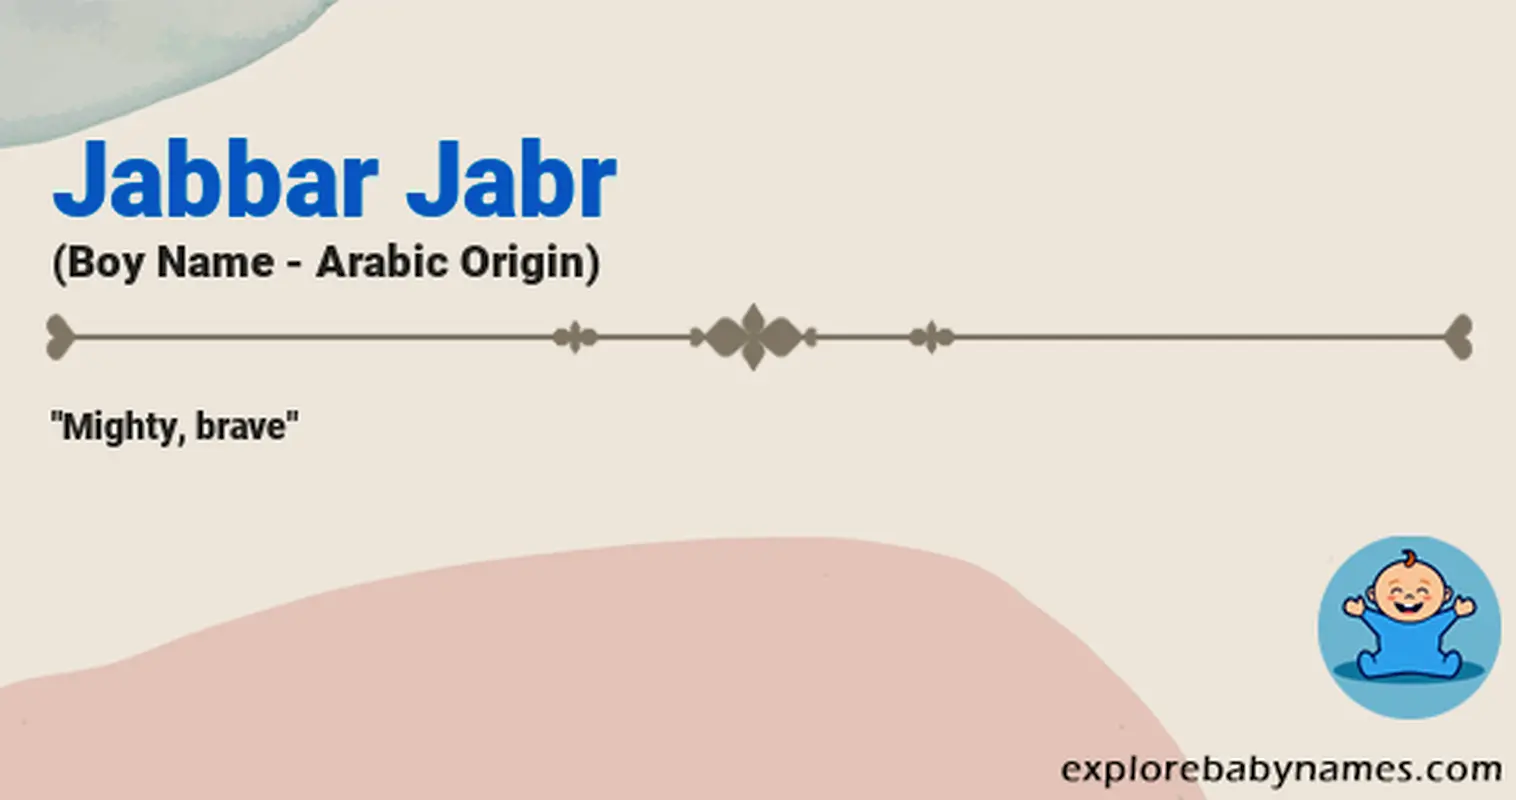 Meaning of Jabbar Jabr